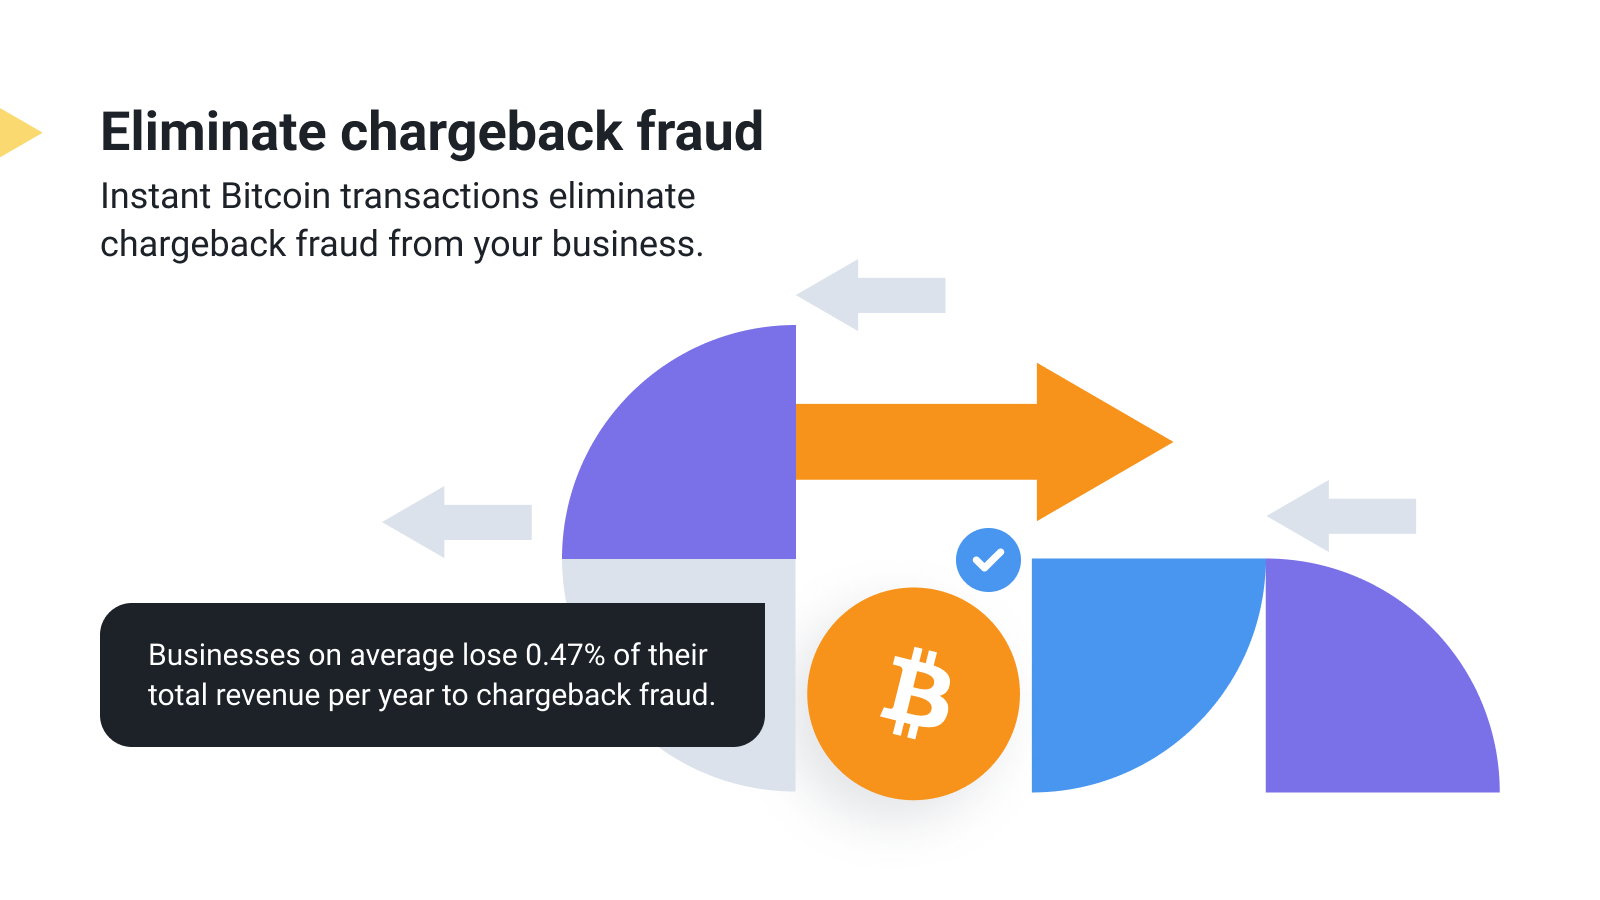 Instant Bitcoin transactions eliminate chargeback fraud